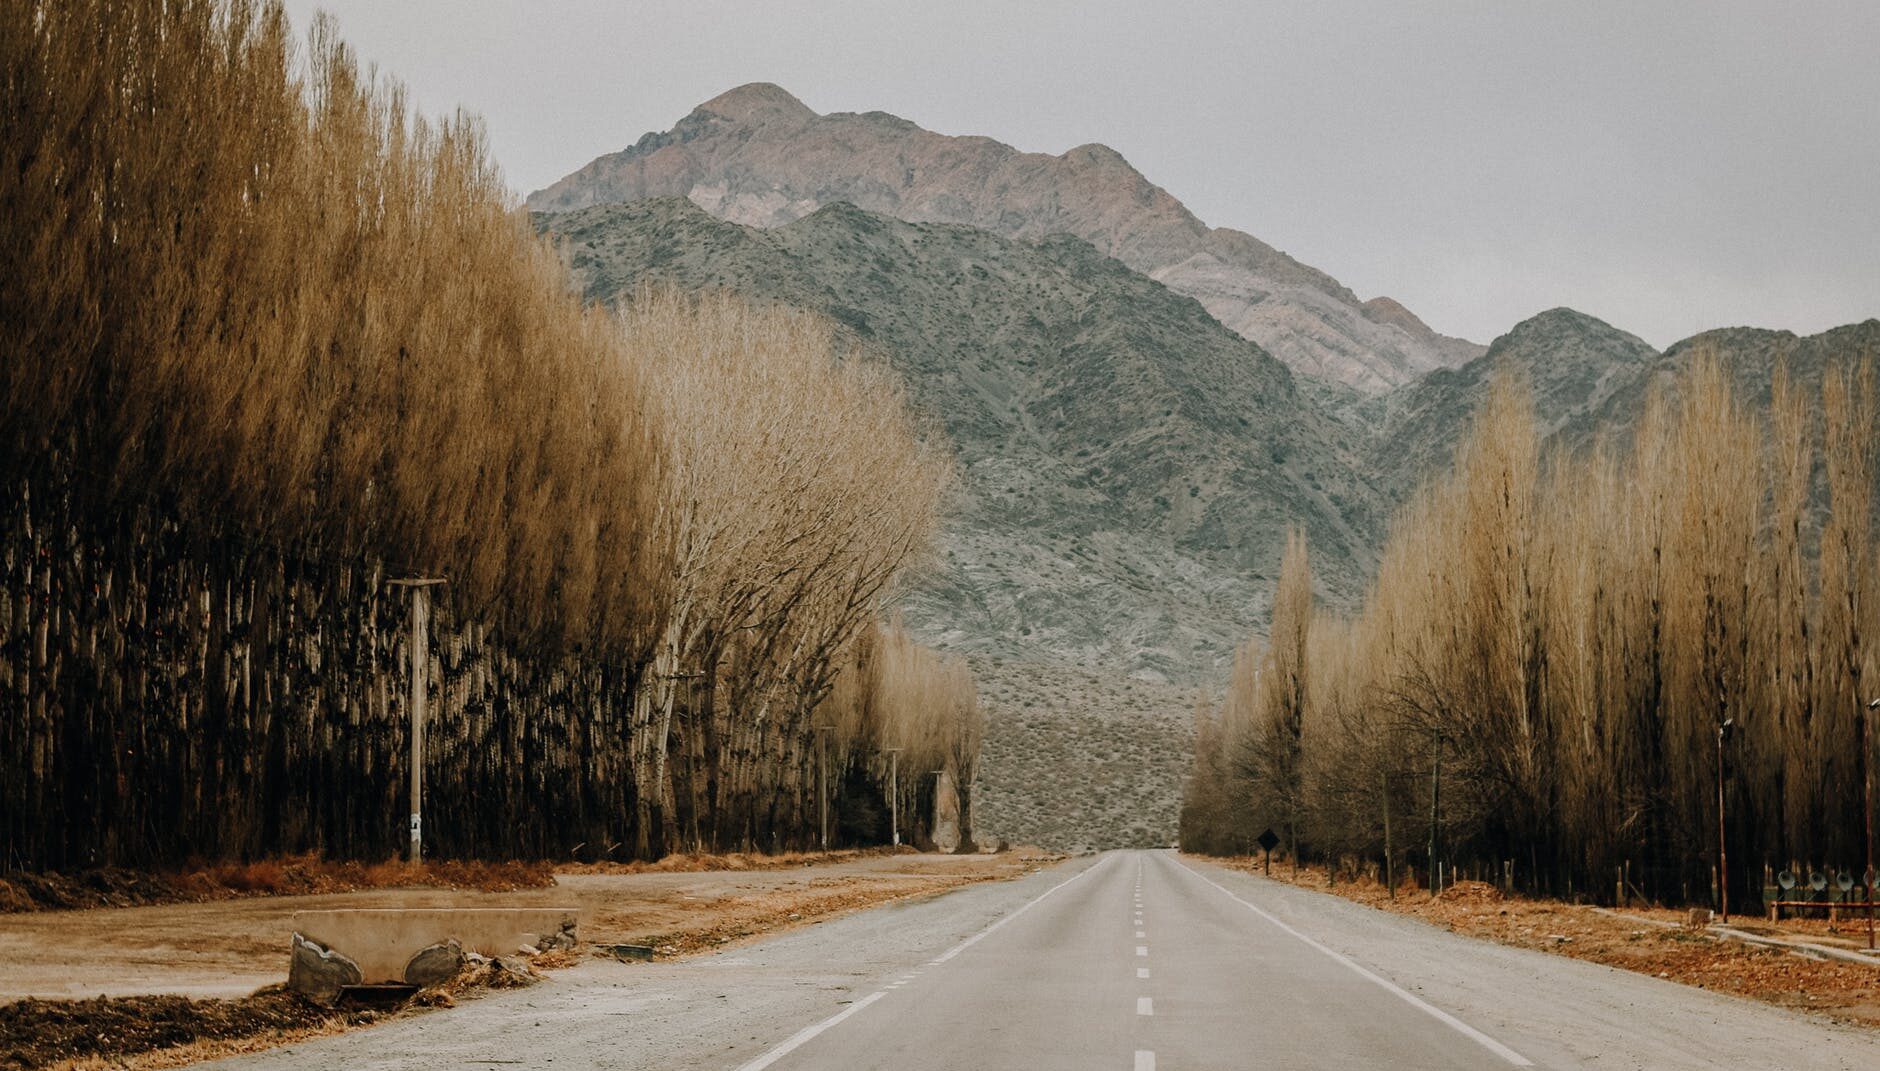 Road with mountains and trees behind it.